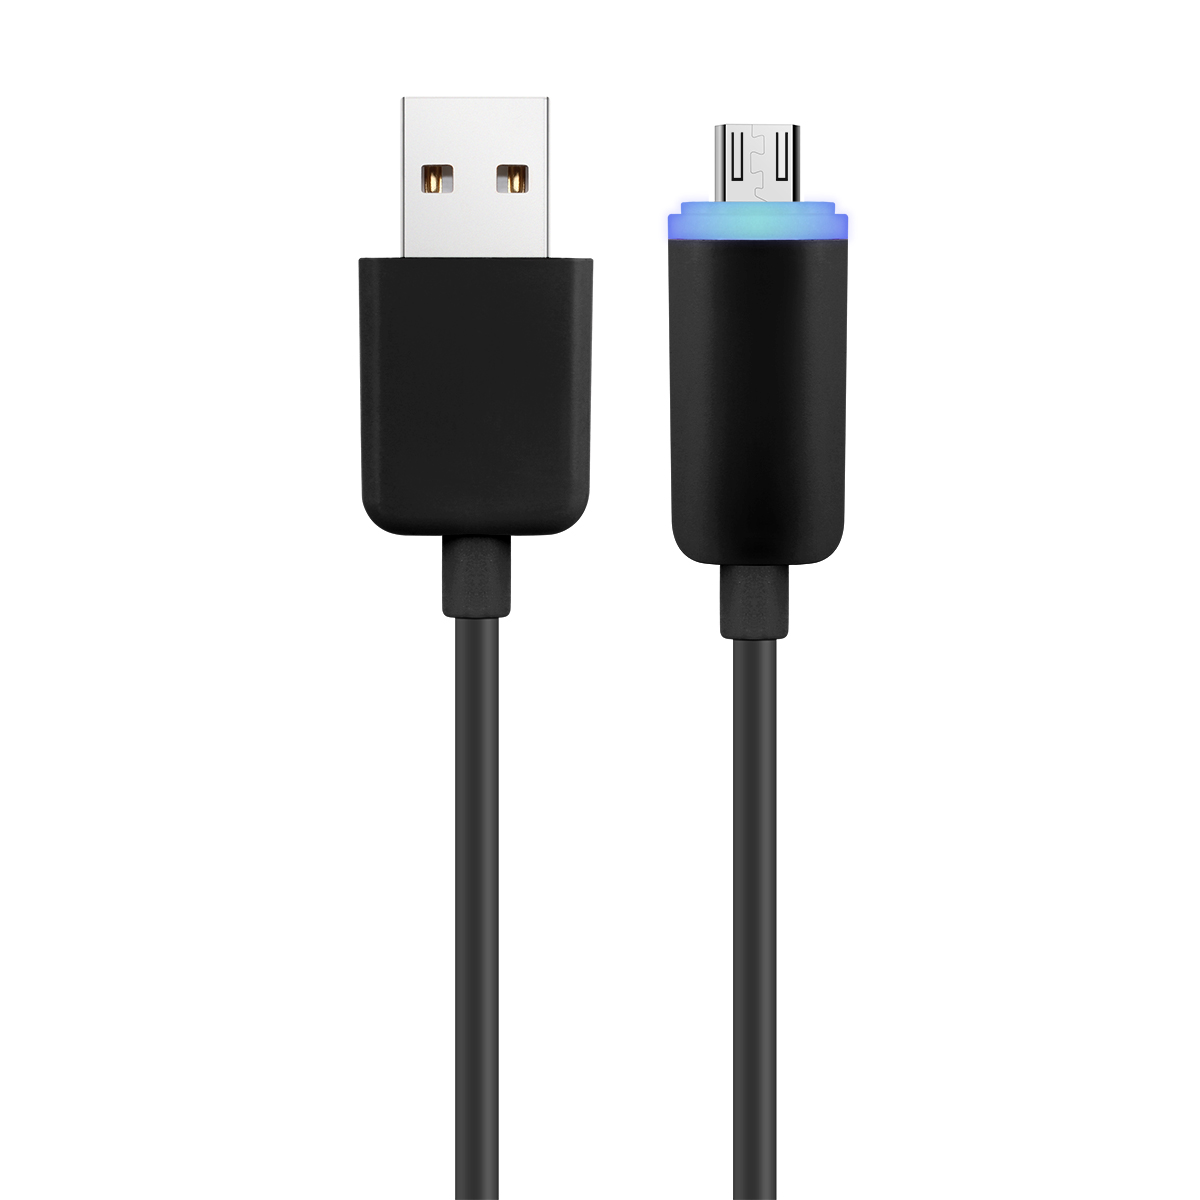 Micro USB Data Charge Cable with LED Light for Android Samsung HTC - Black